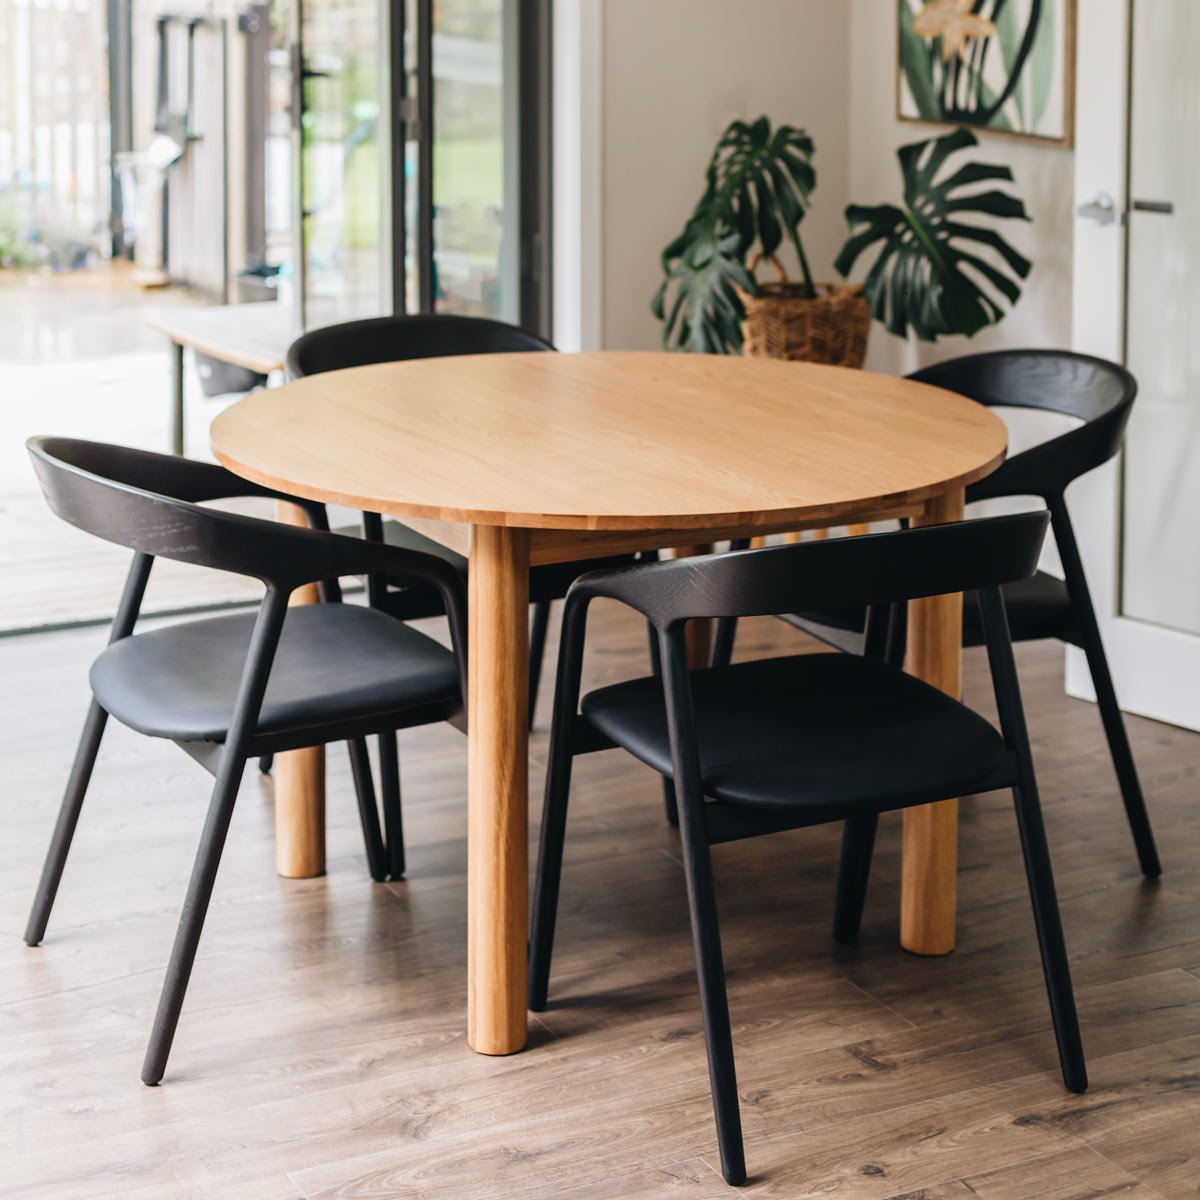 Simple round table